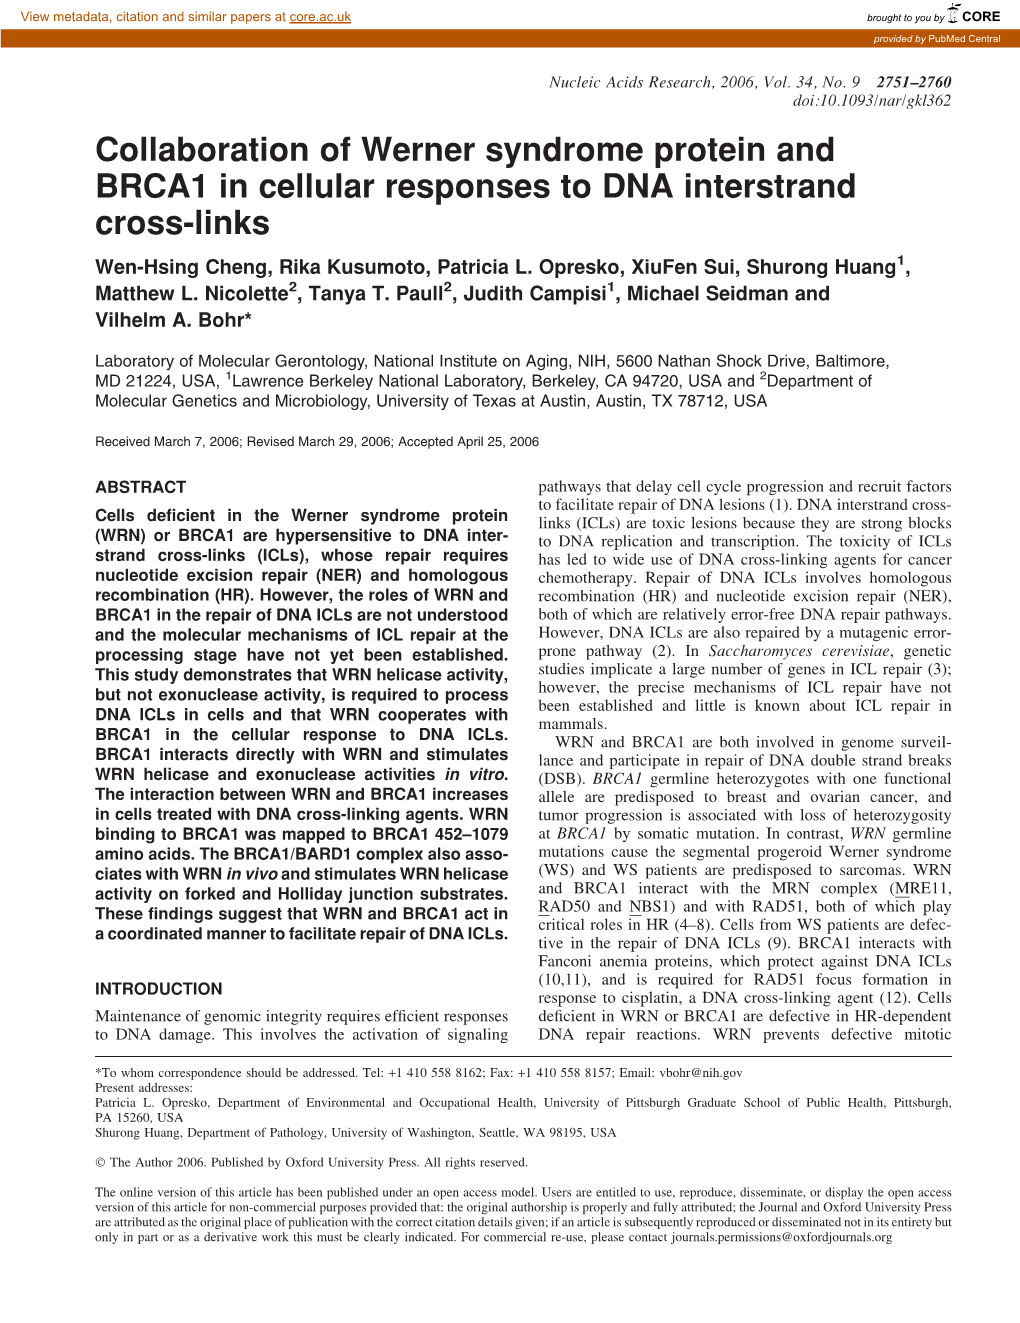 Collaboration of Werner Syndrome Protein and BRCA1 in Cellular Responses to DNA Interstrand Cross-Links Wen-Hsing Cheng, Rika Kusumoto, Patricia L